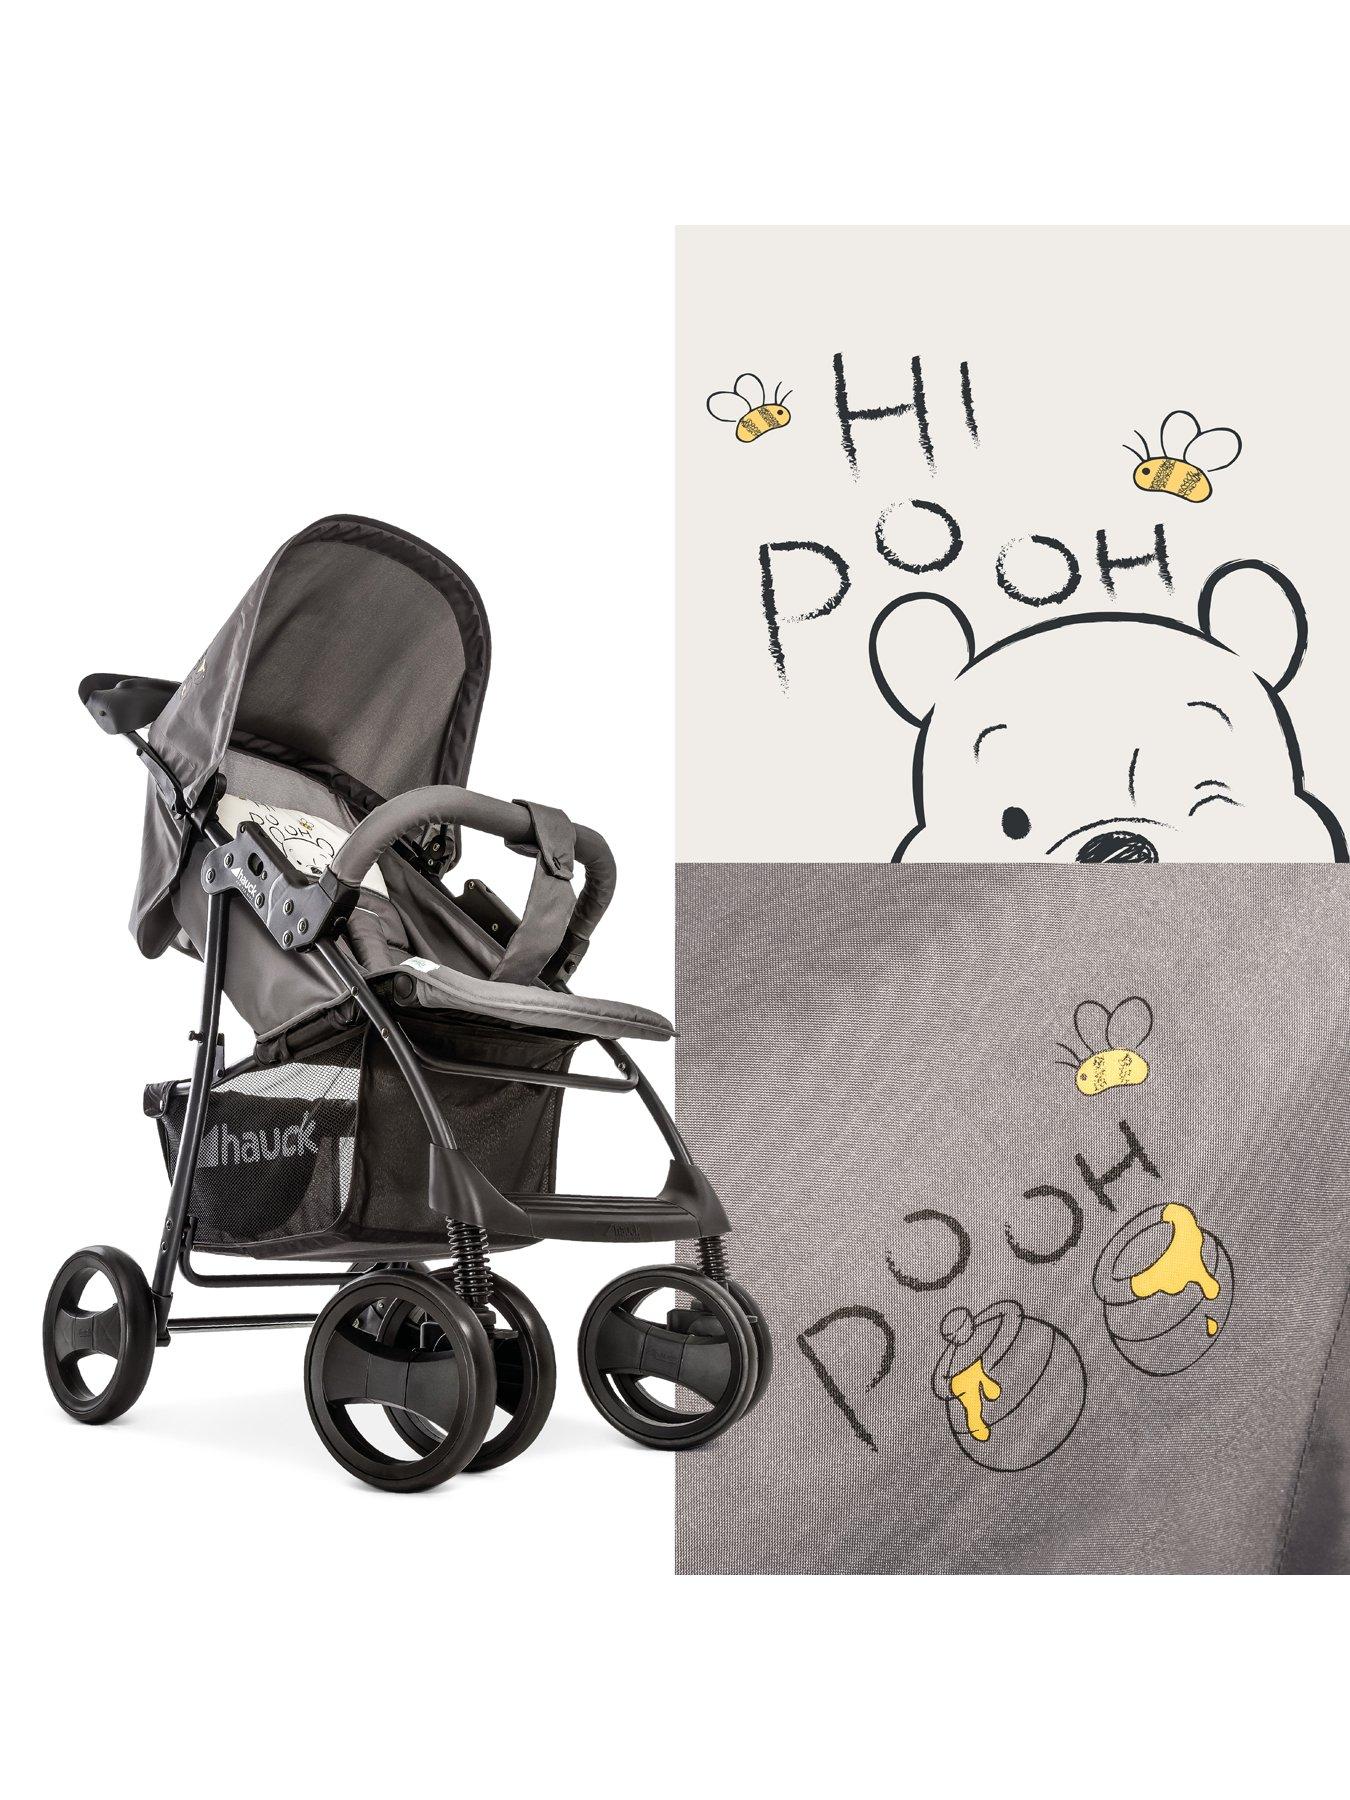 hauck winnie the pooh travel system